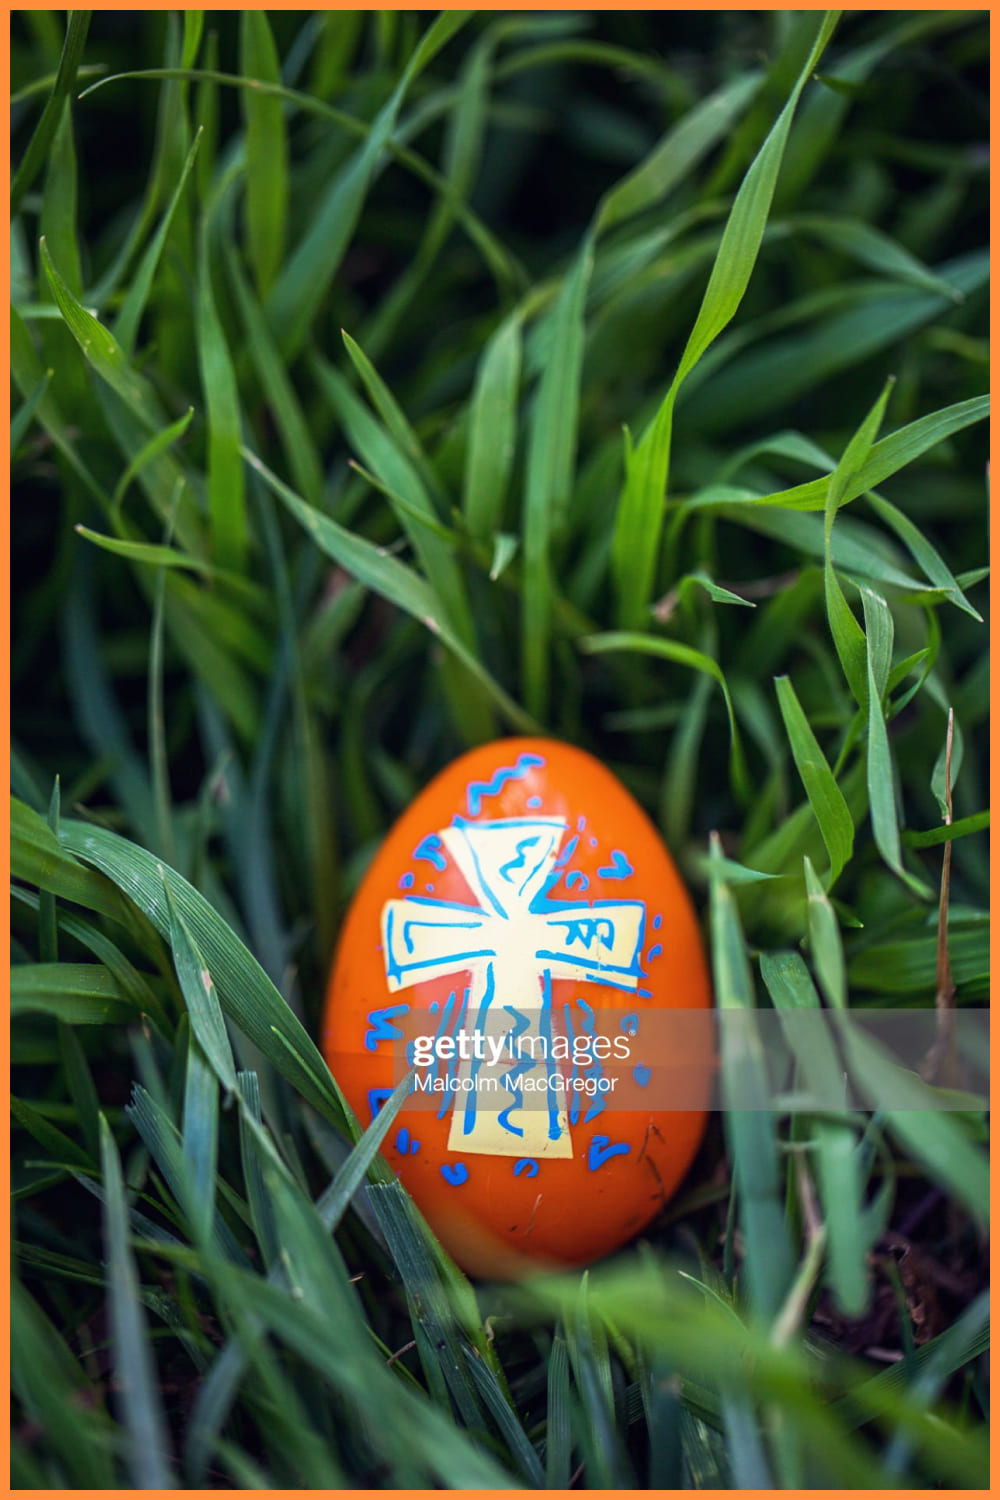 Easter egg with painted on cross design sits in tall green grass waiting to be found.